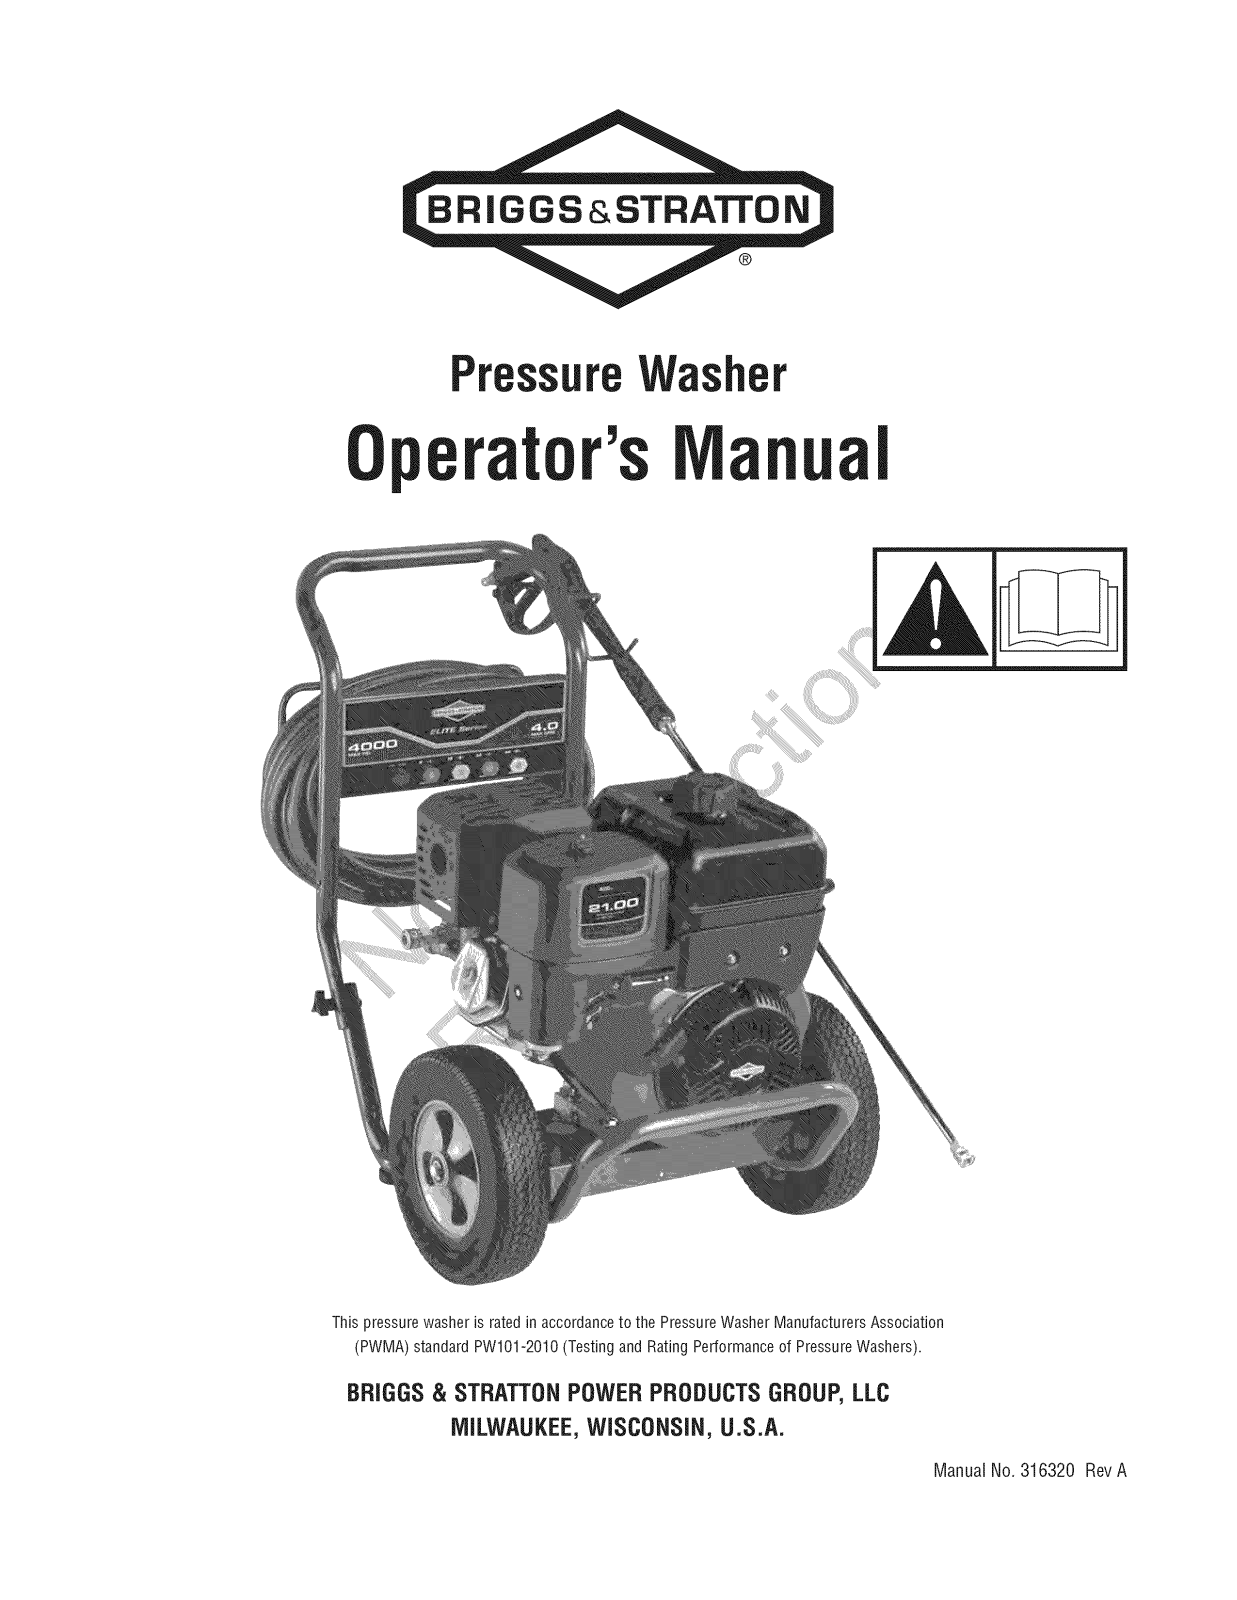 Briggs & Stratton 020507-00 Owner’s Manual